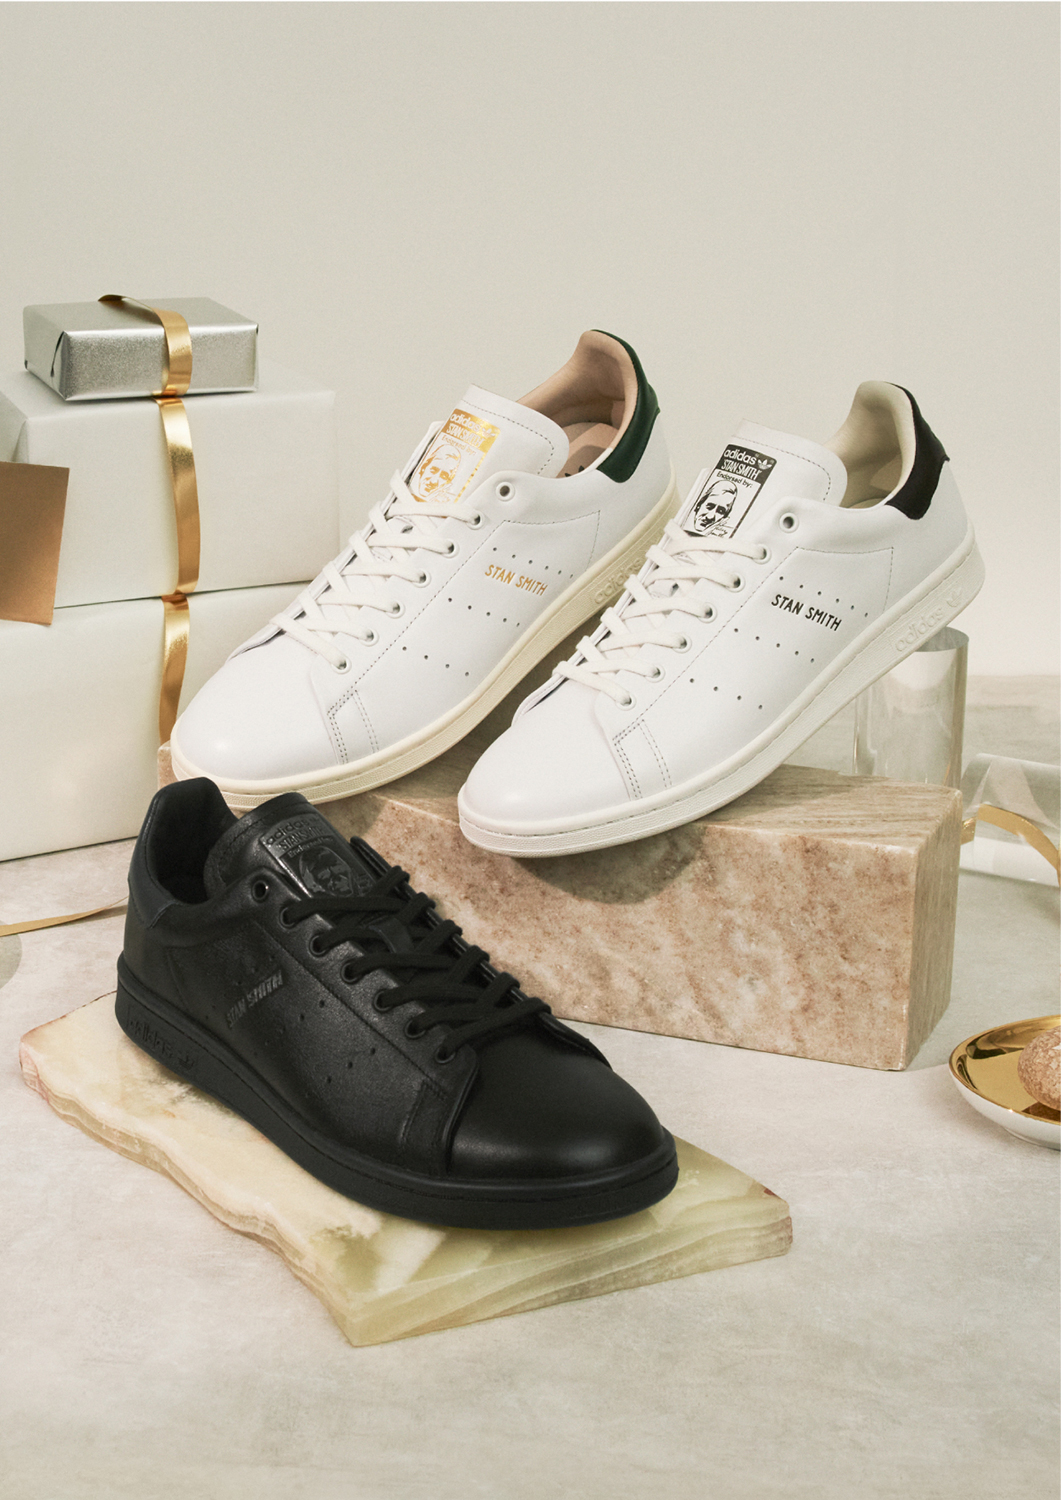 adidas スタンスミス　LUX / STAN SMITH LUX